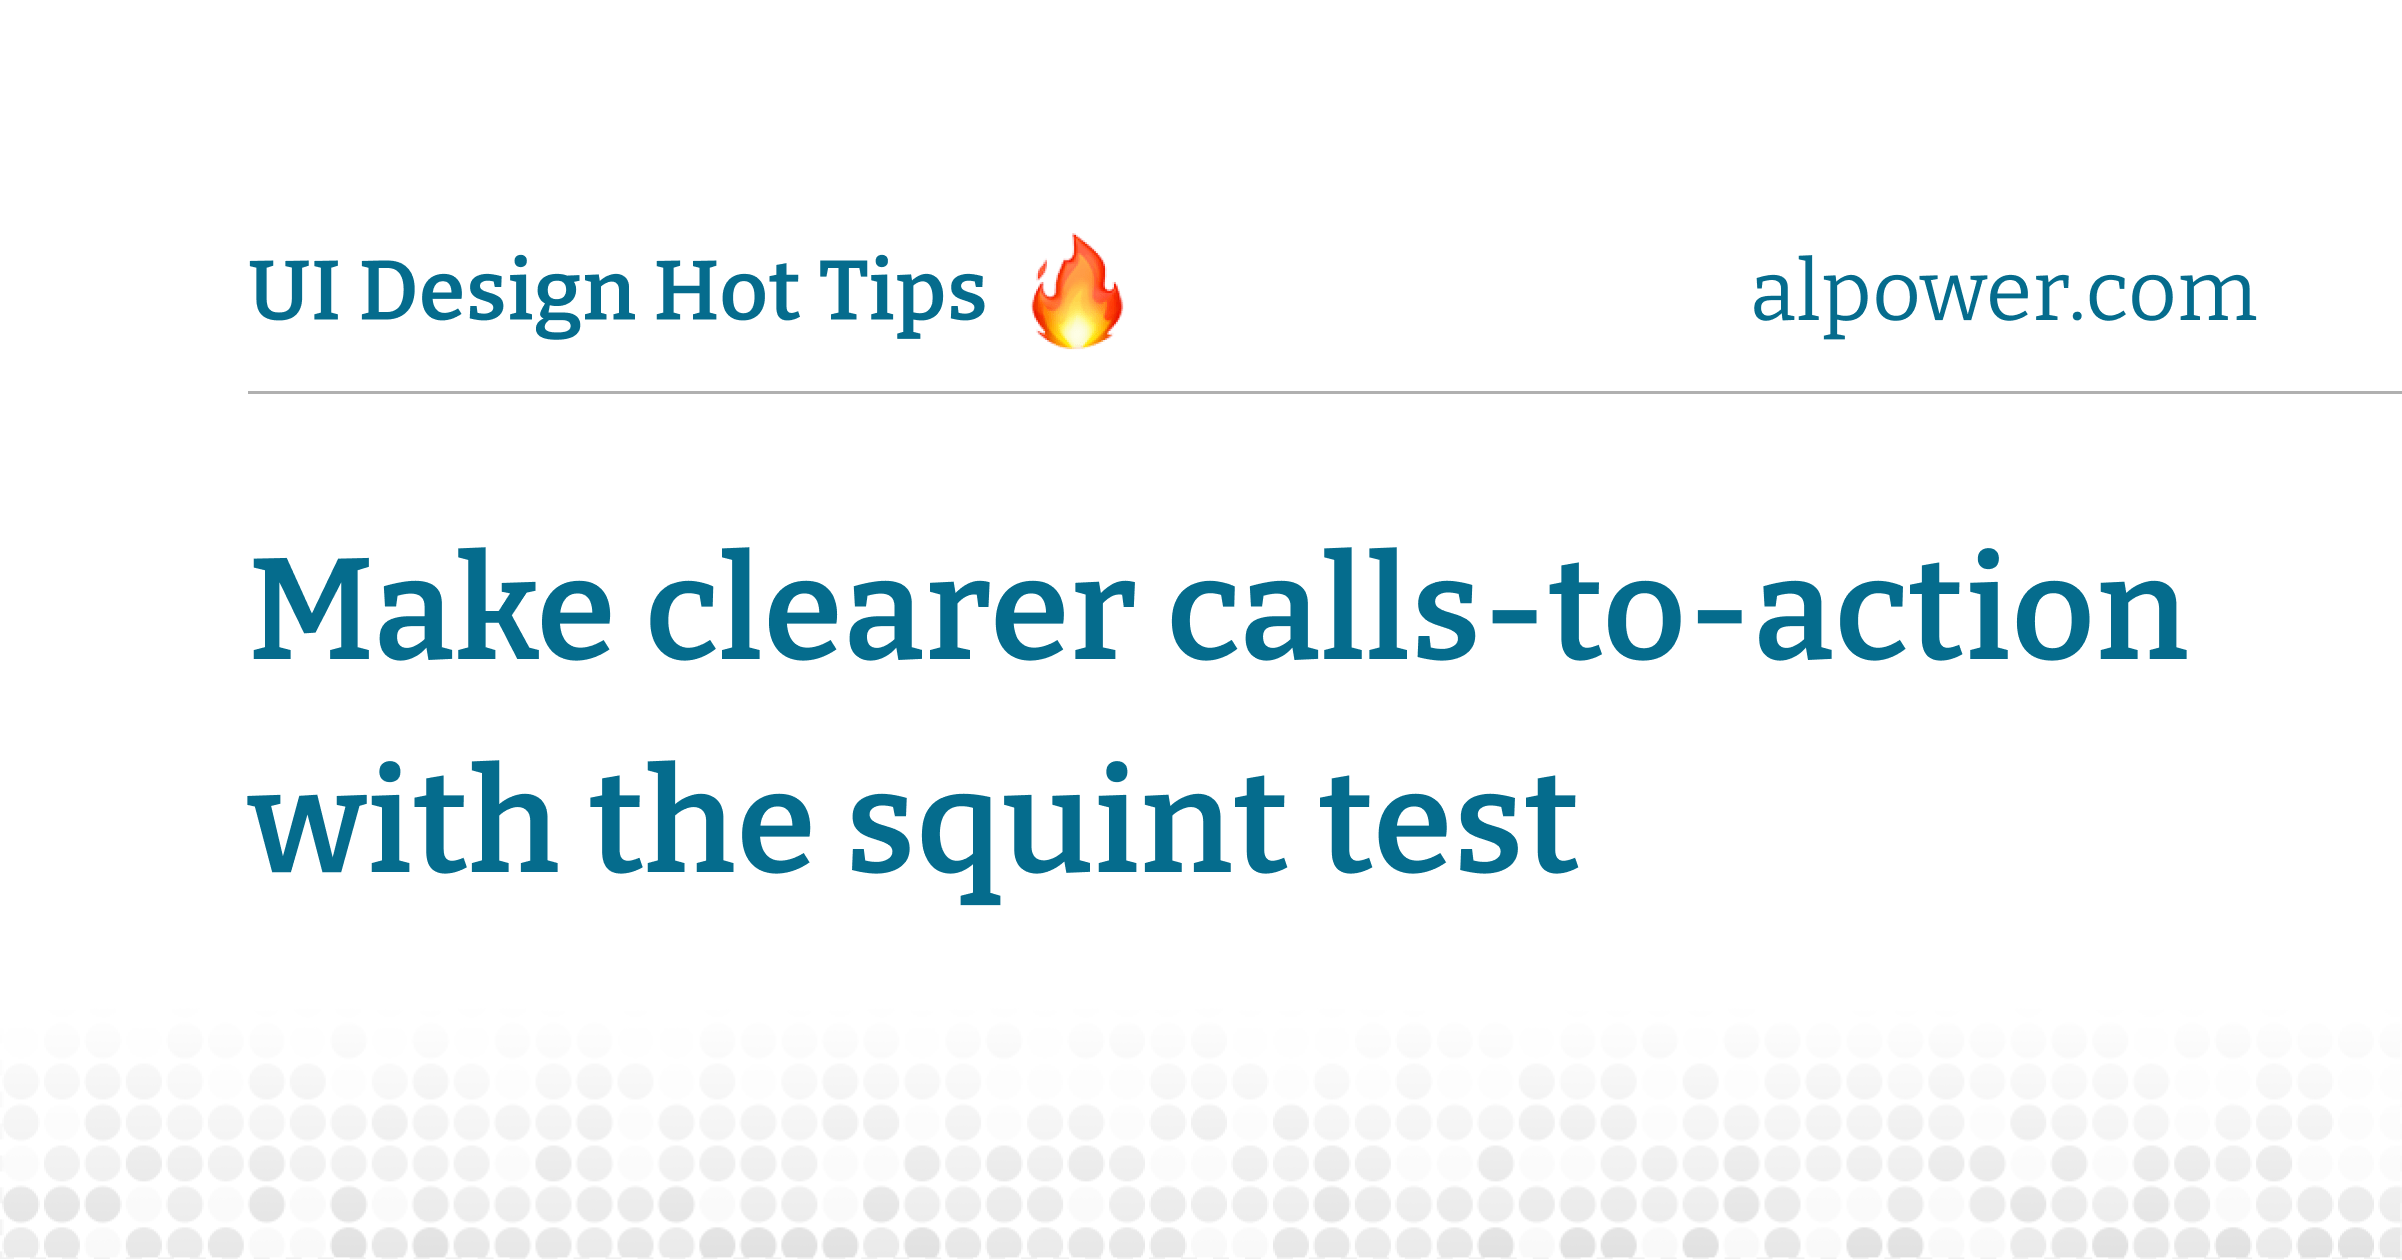 Make clearer calls-to-action with the squint test